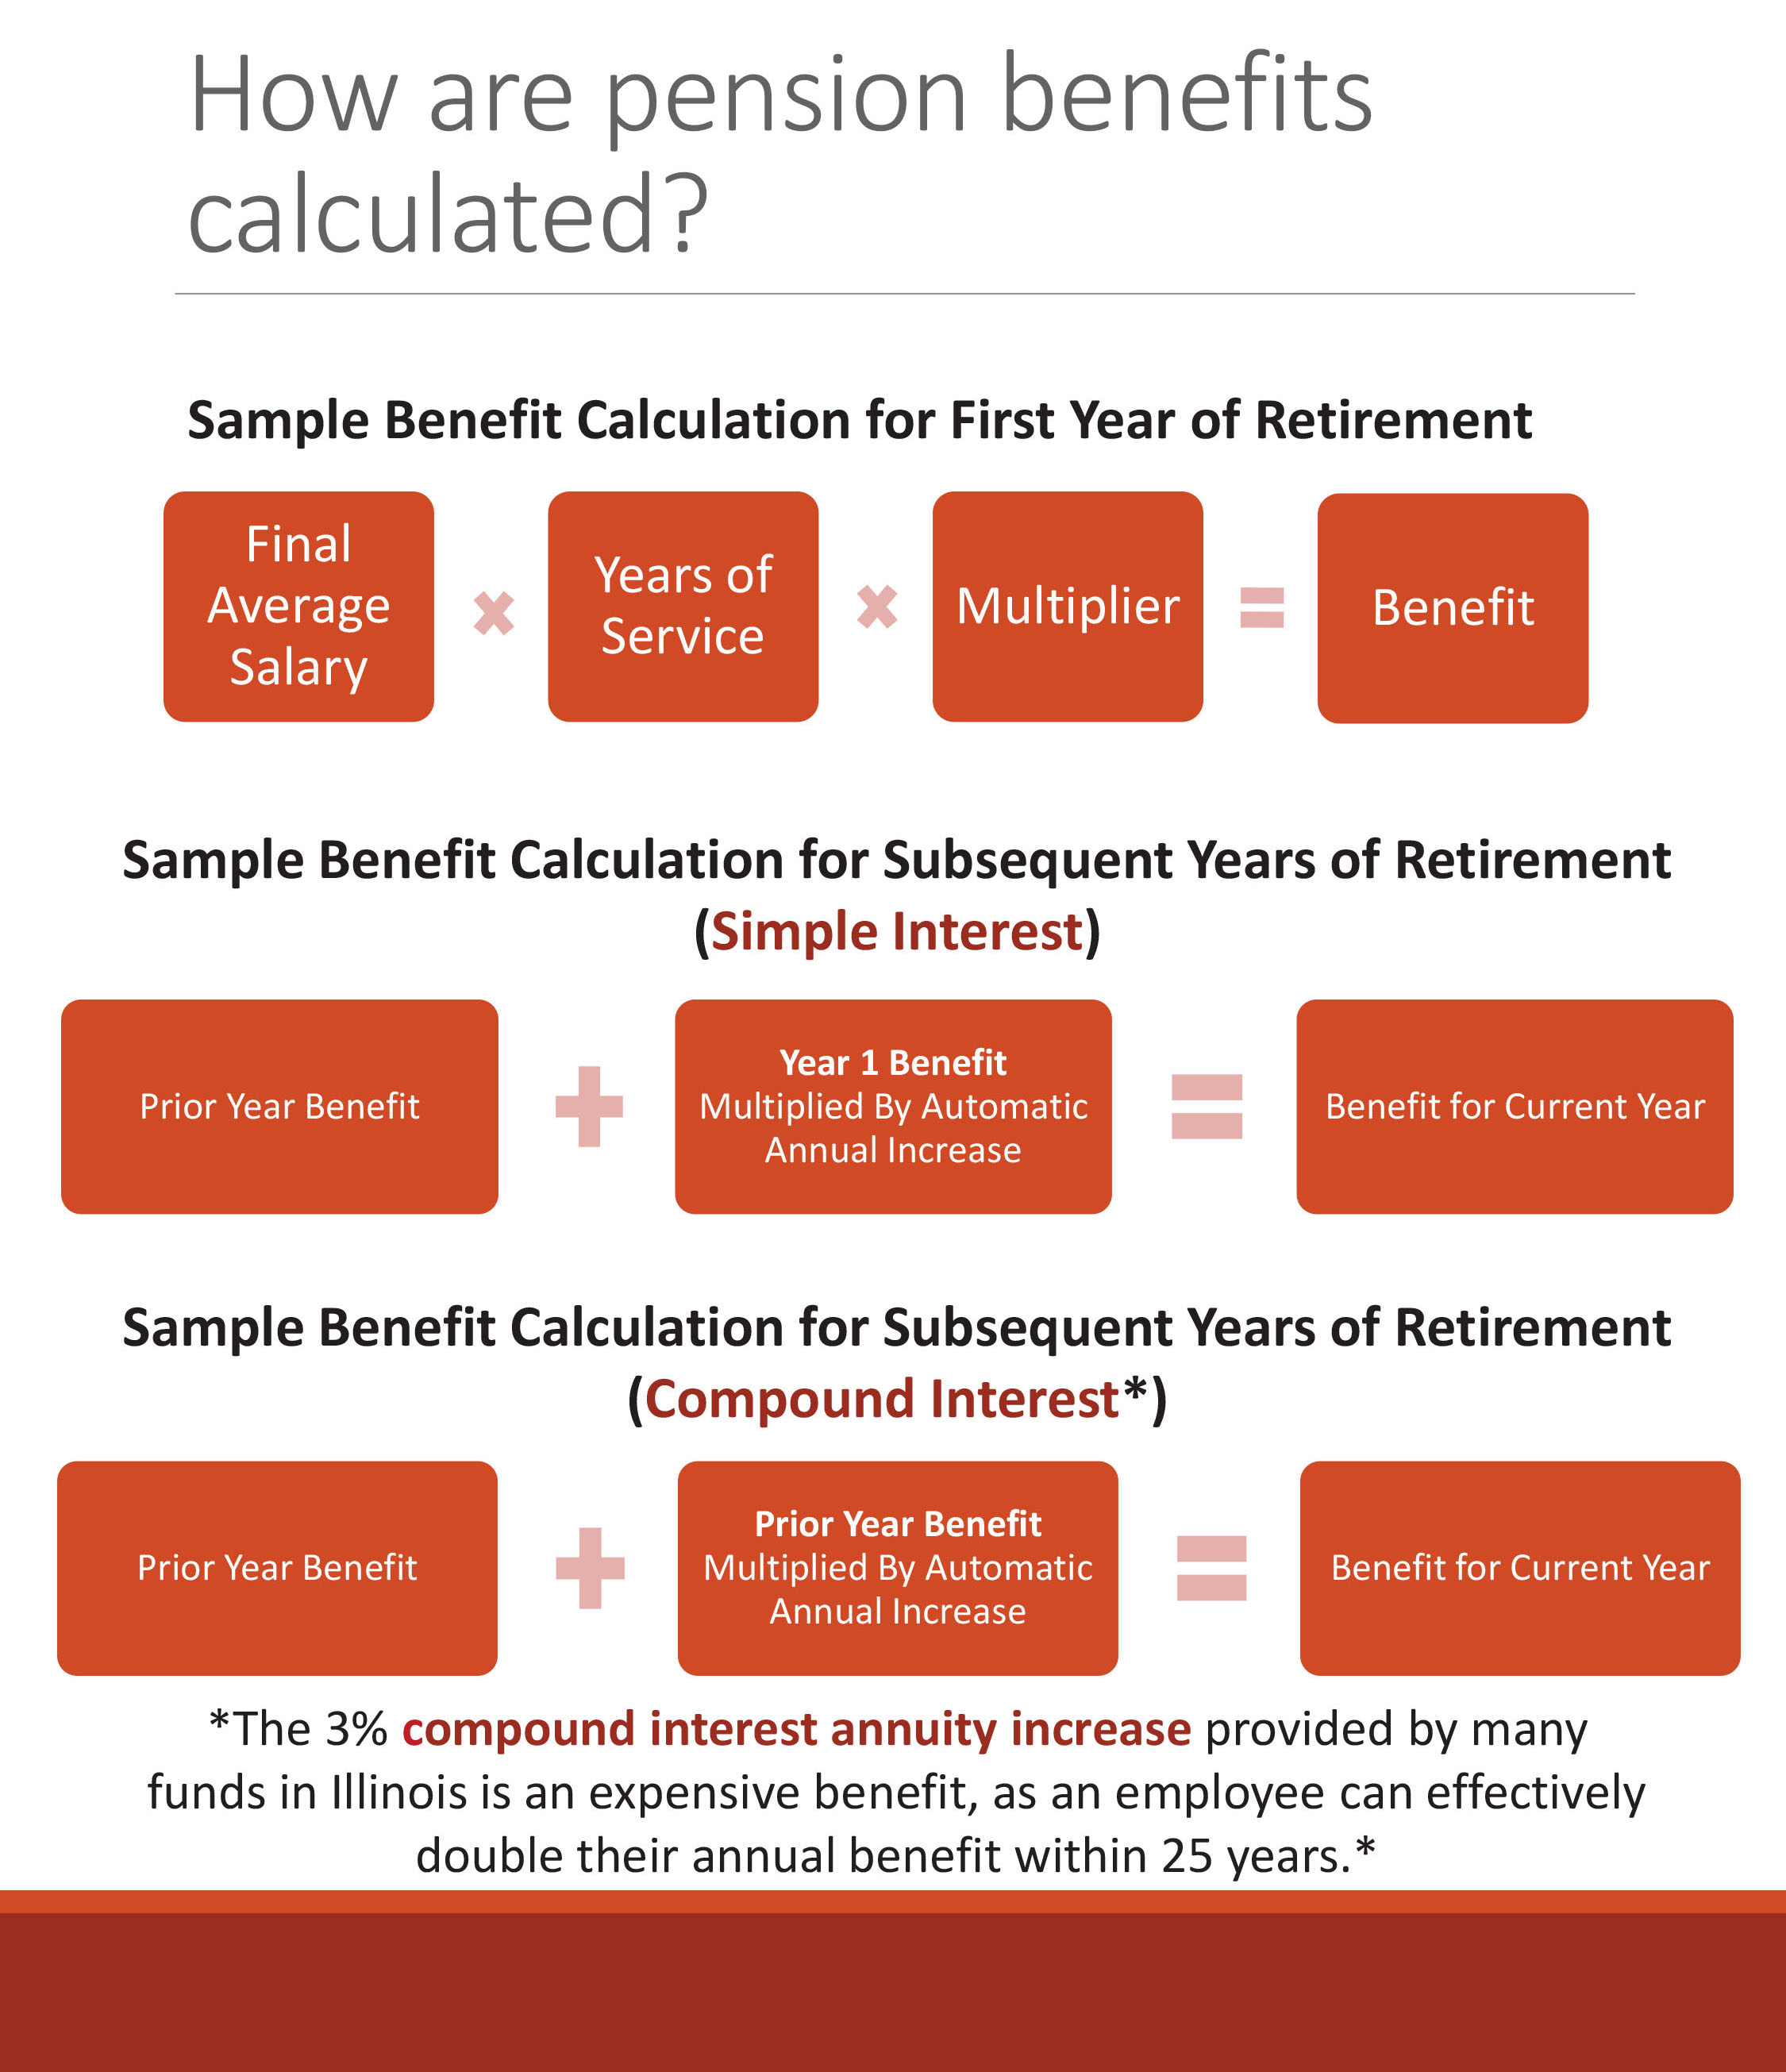 how_are_pension_benefits_calculated.jpg